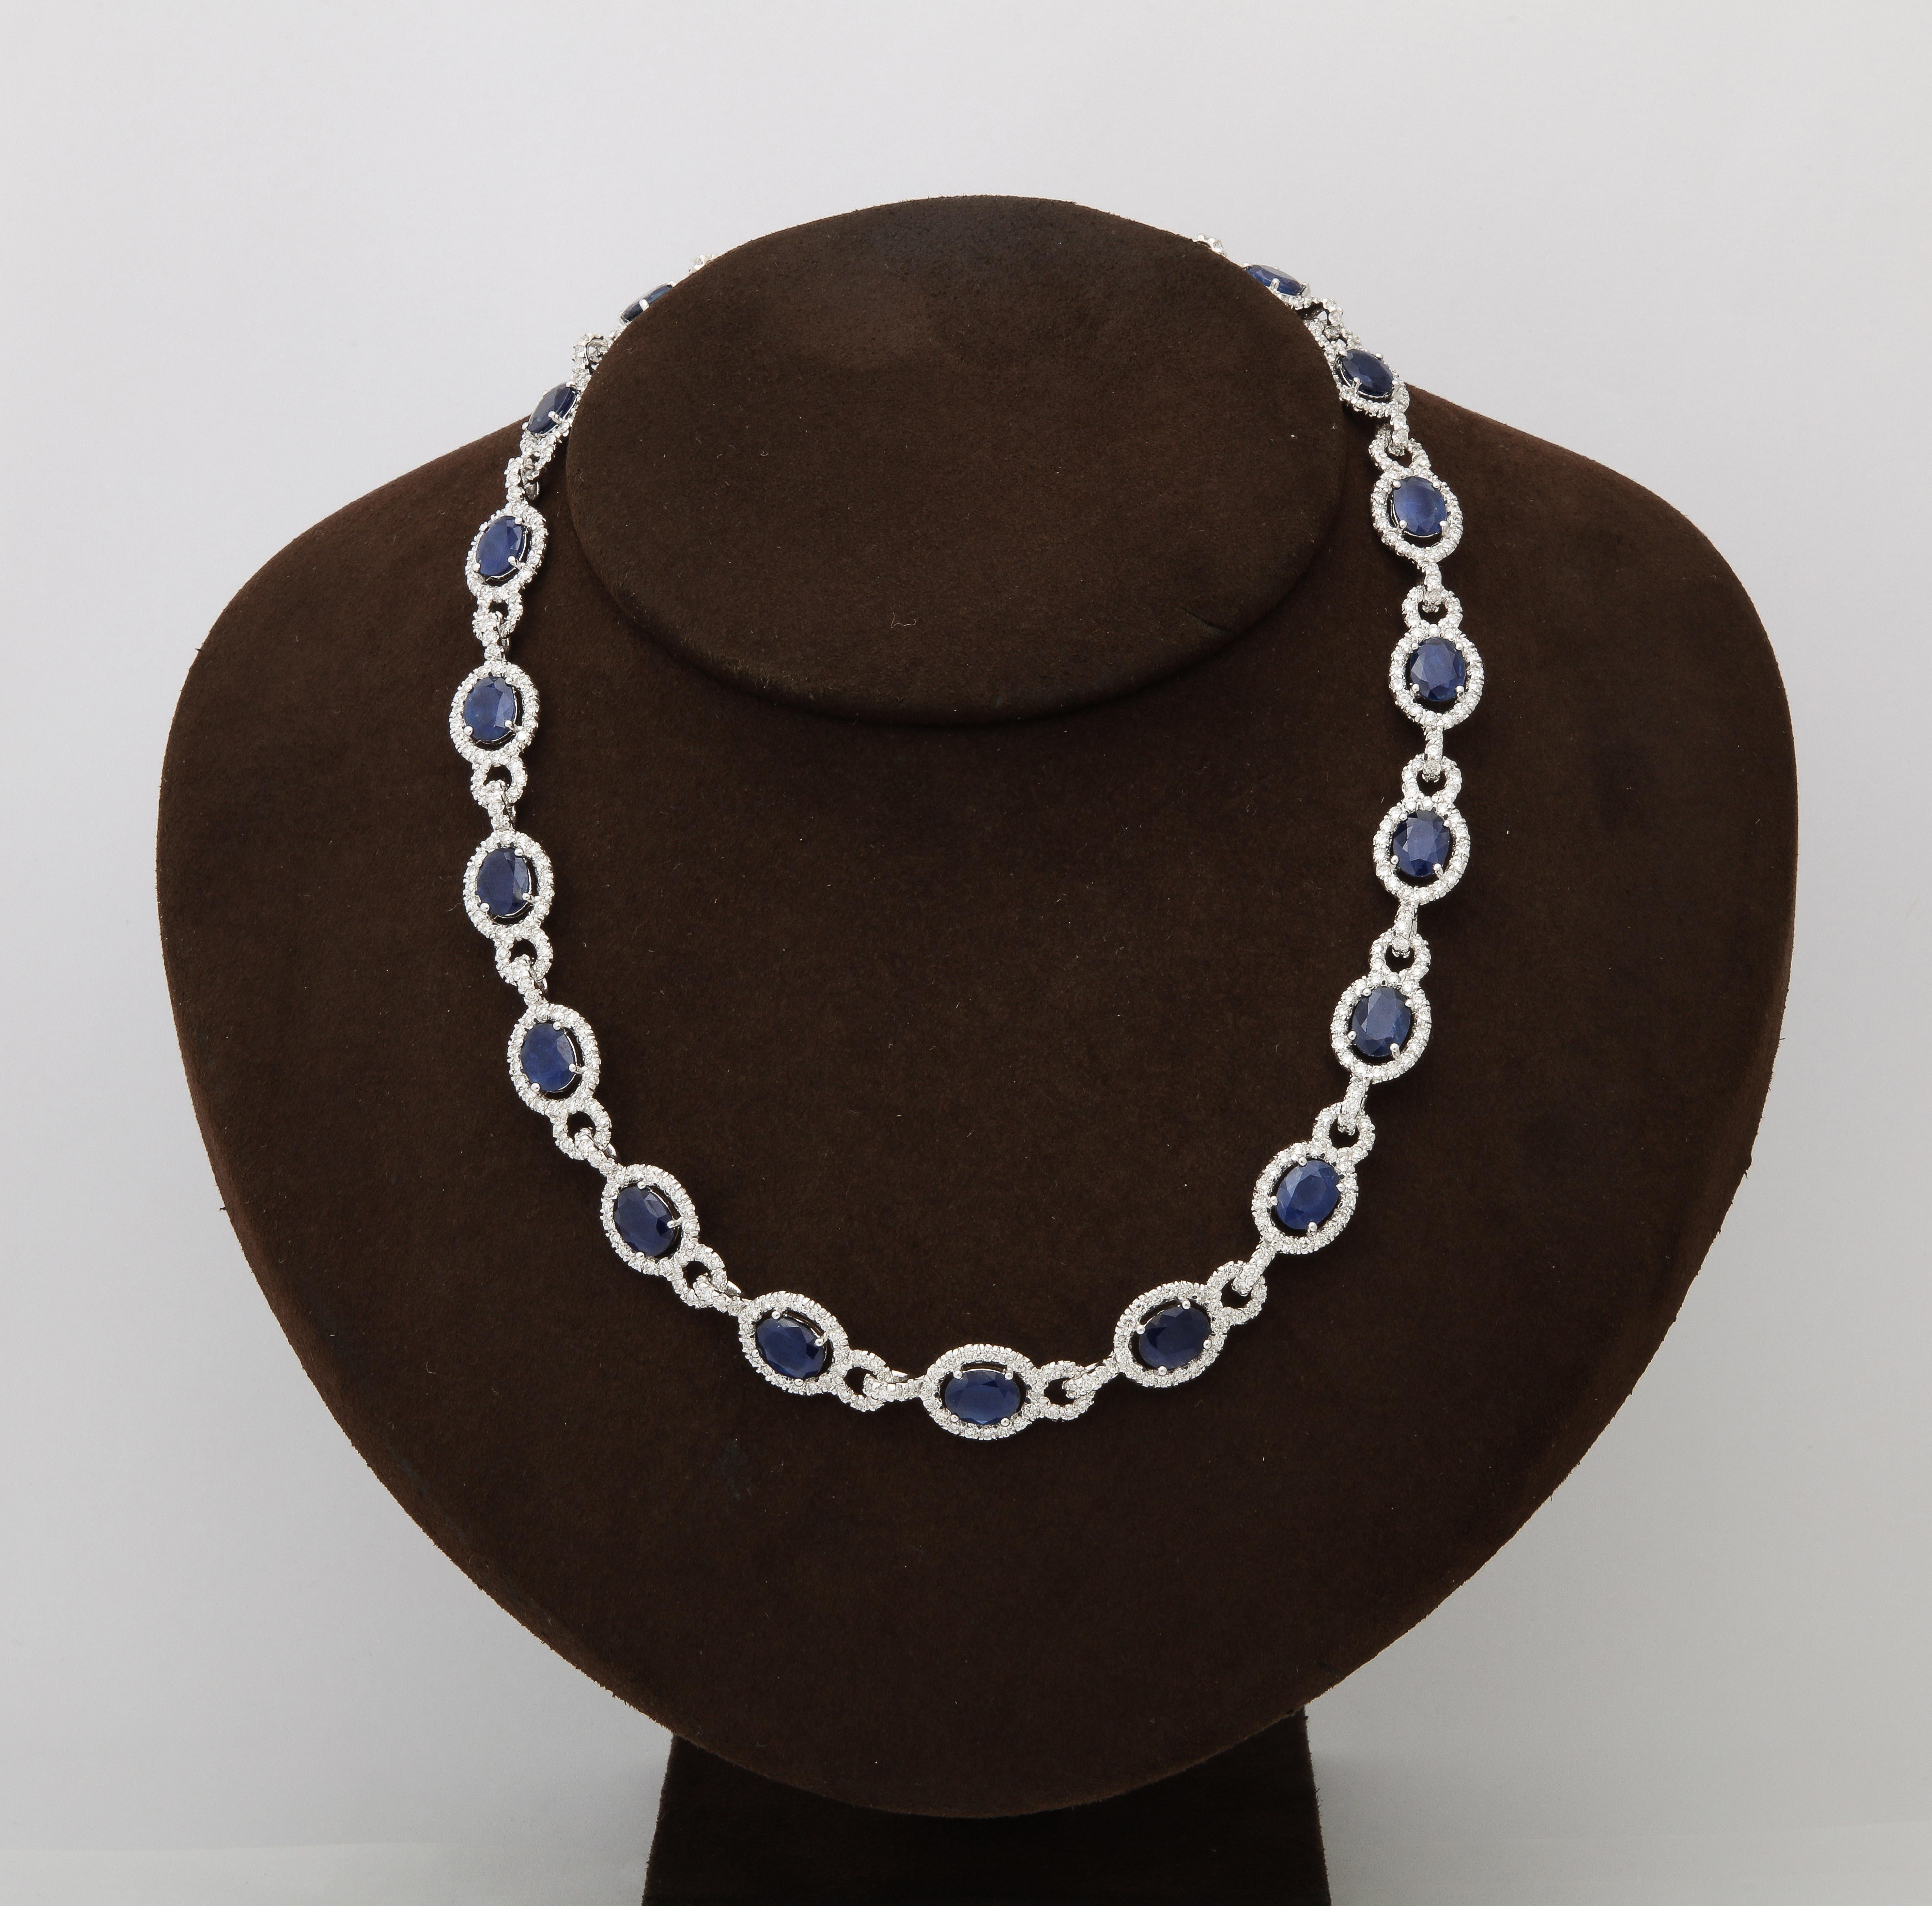 
A timeless design! 

39.60 carats of Oval cut Blue Sapphire. 

11.30 carats of white round brilliant cut diamonds. 

18k white gold. 

16.5 inch length 